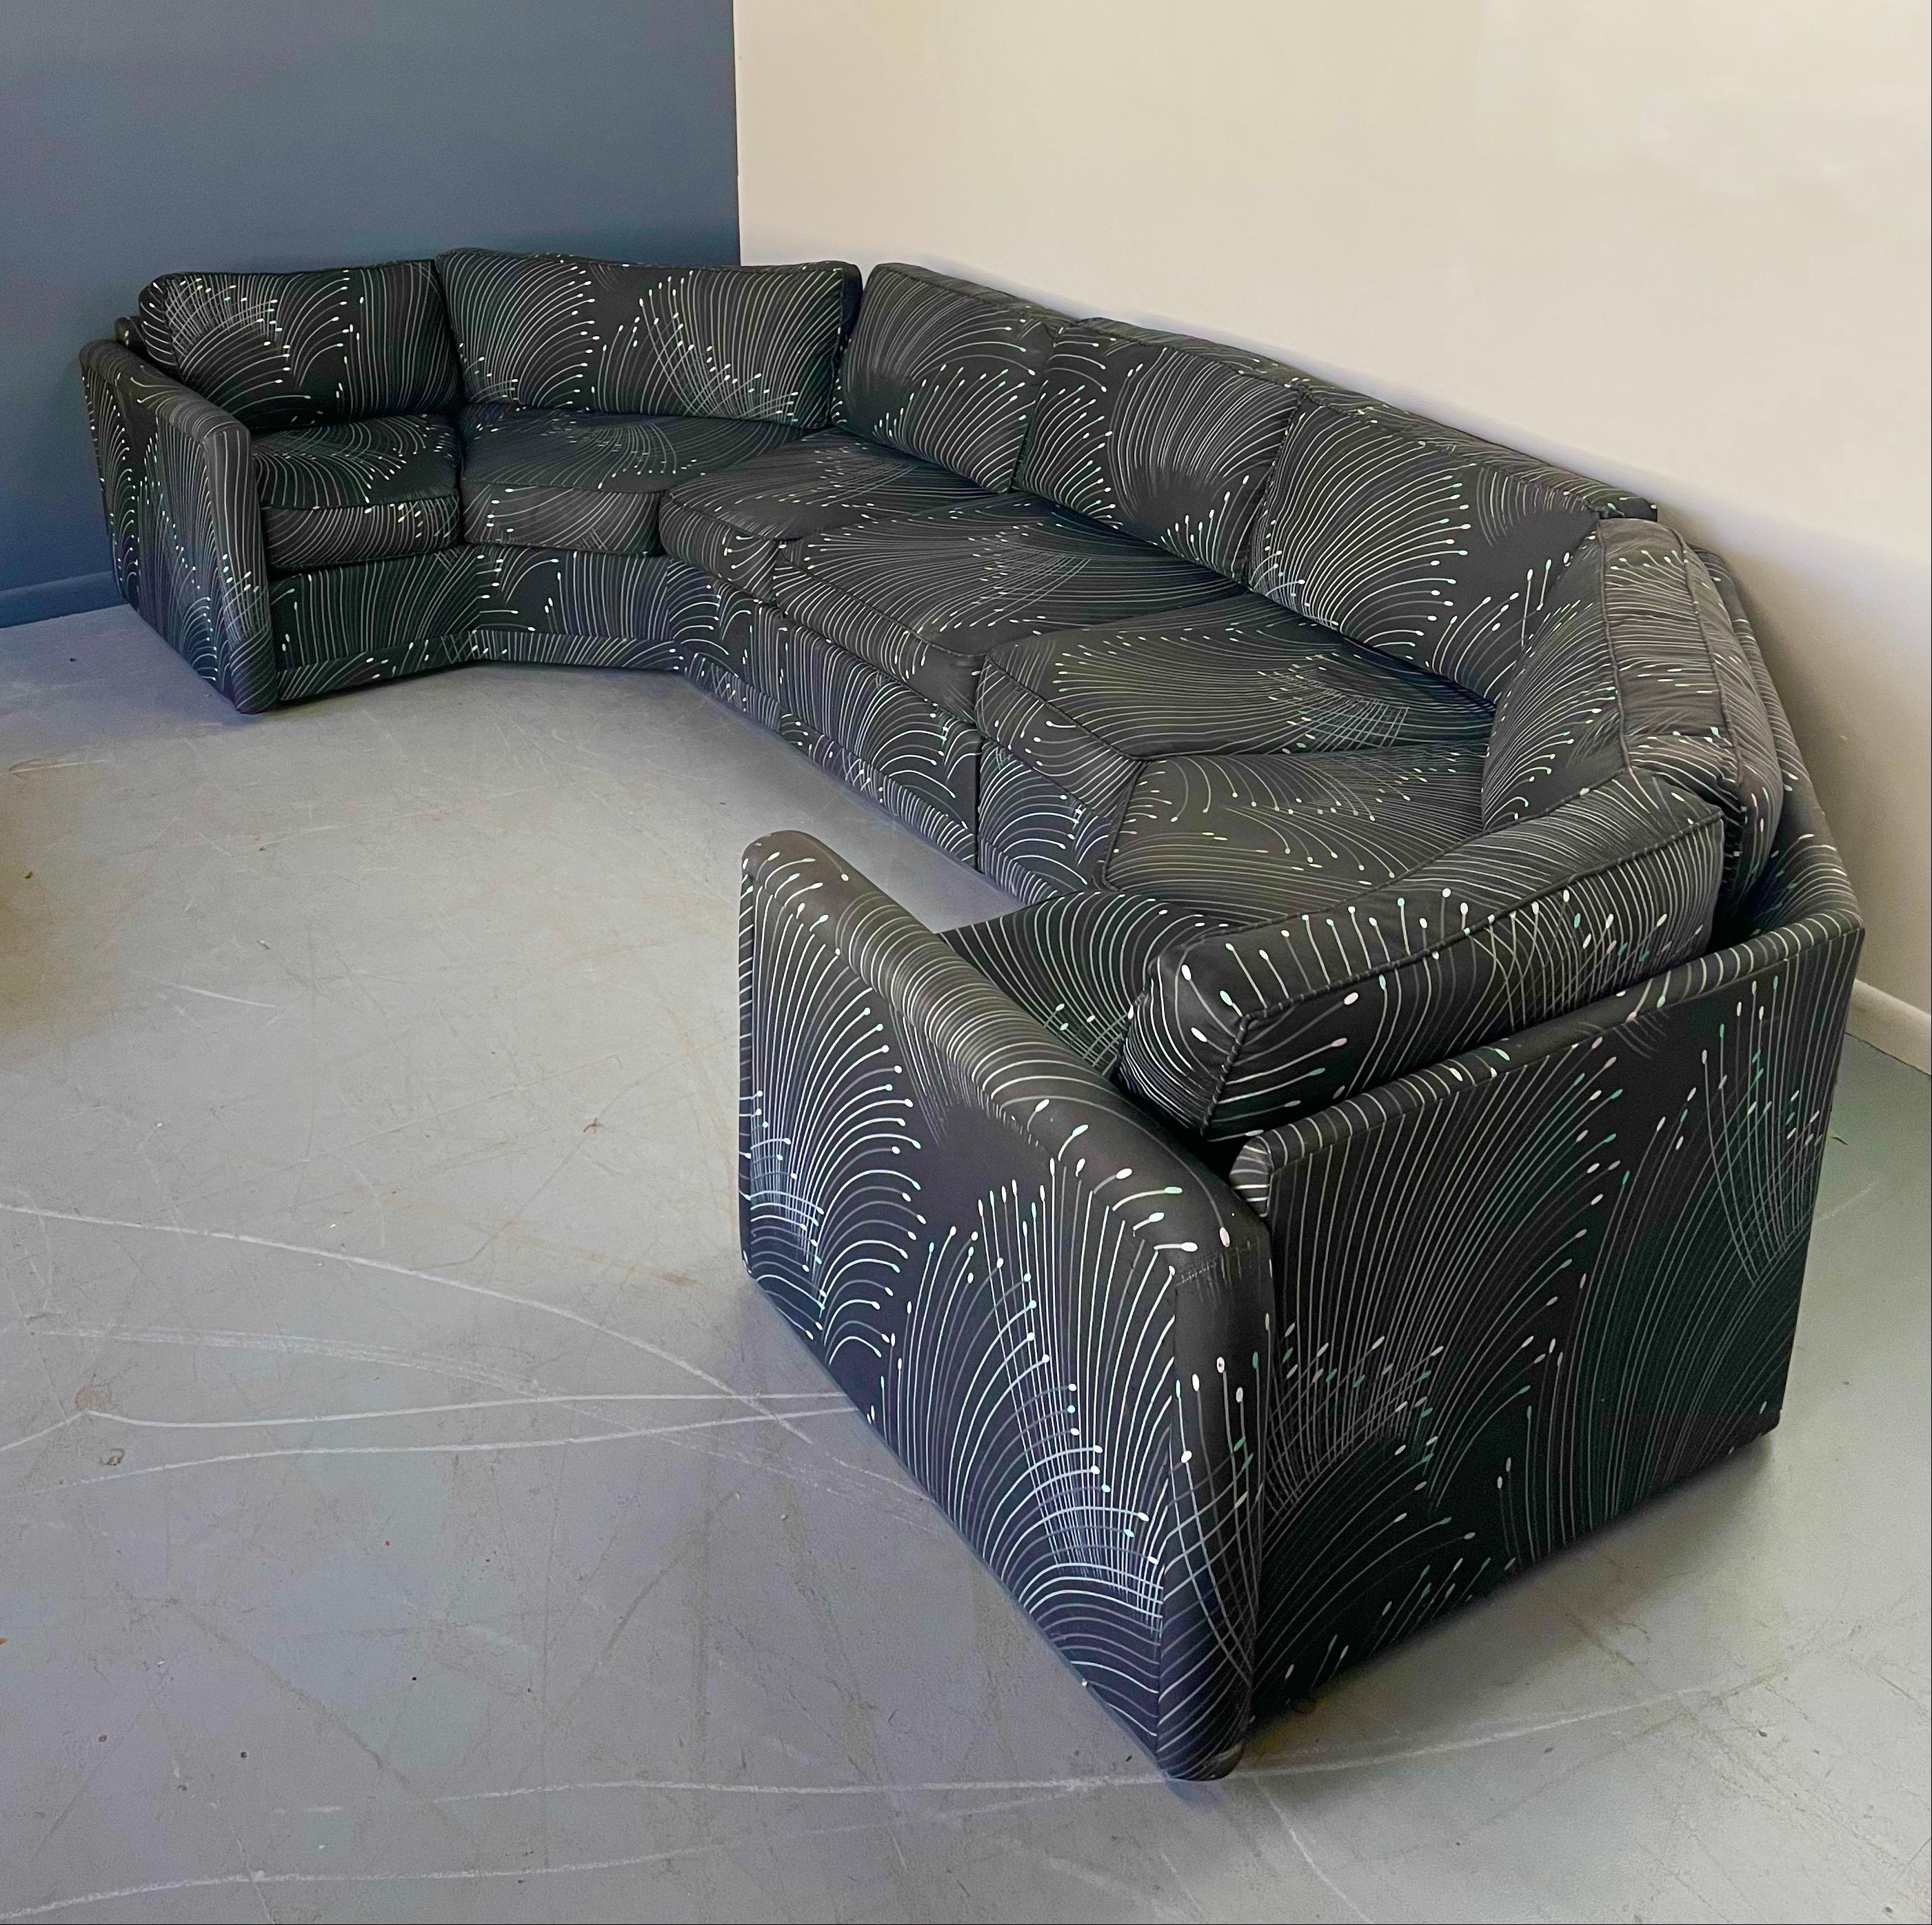 A large and impressive semi circular sofa designed in the style of Milo Baugman and produced by Carsons in the 1970s. It features 2 angular sections and a single section in the middle that can be removed to create a smaller profile, retaining the